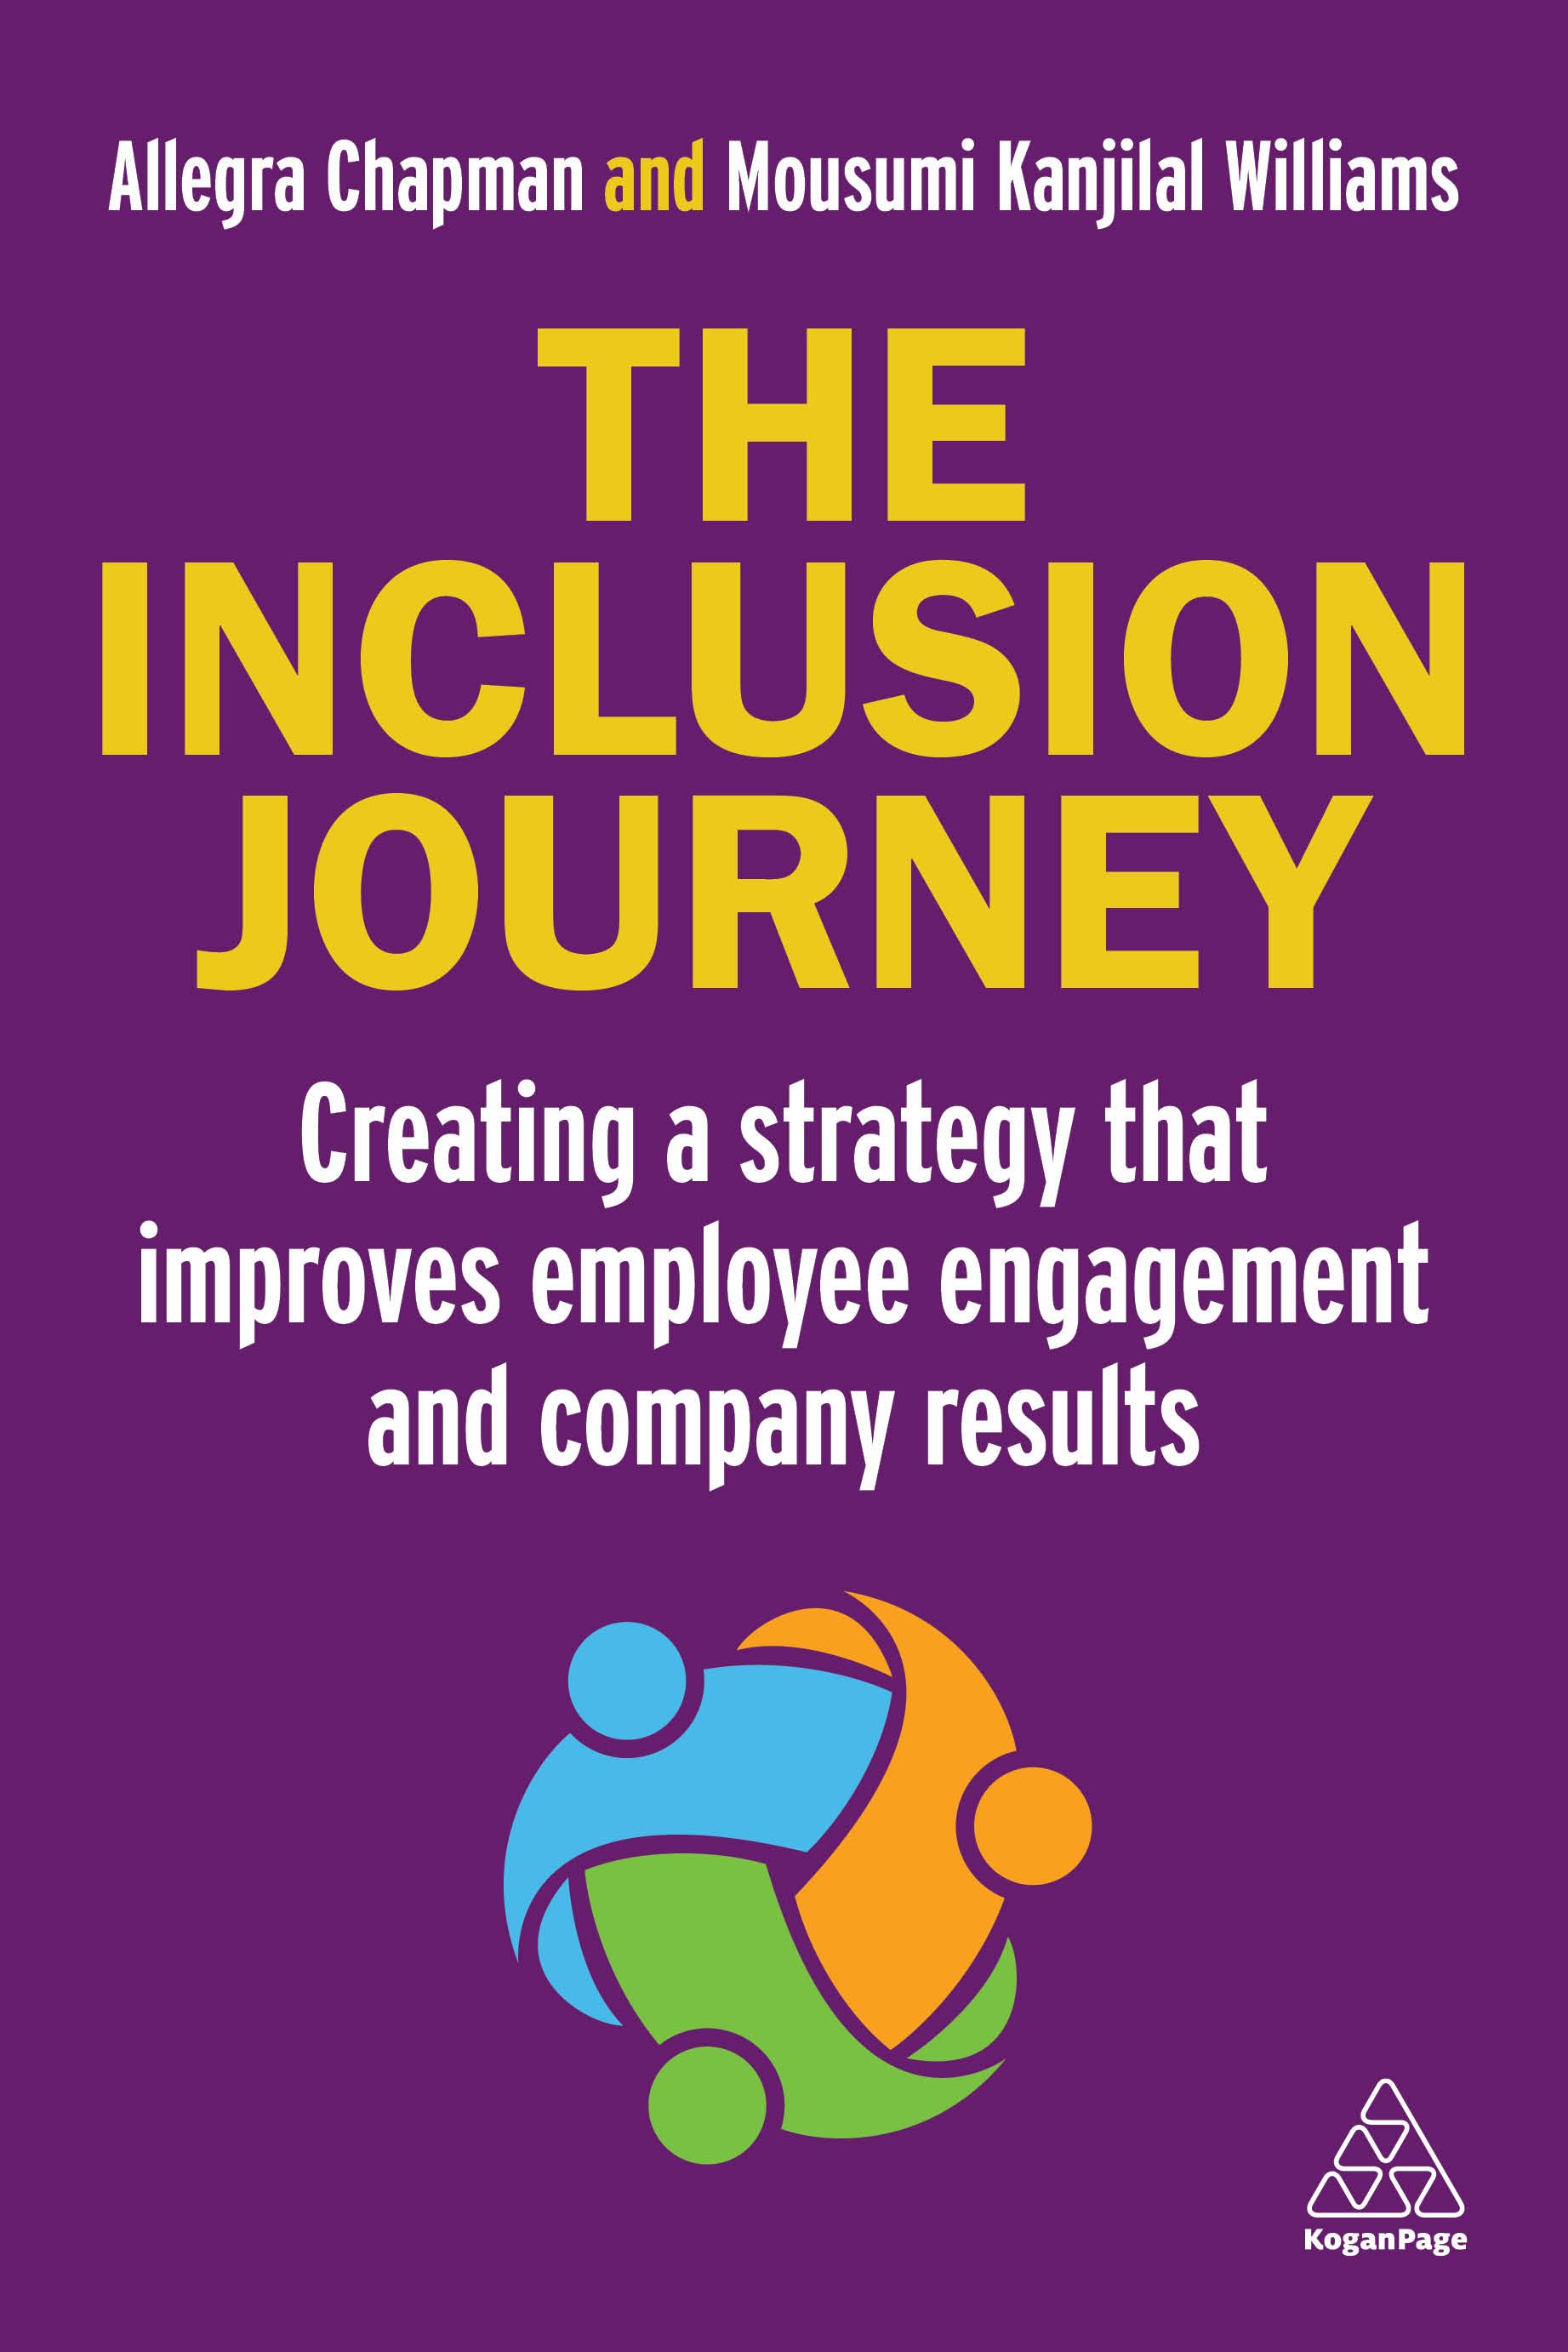 The Inclusion Journey_feed.jpg